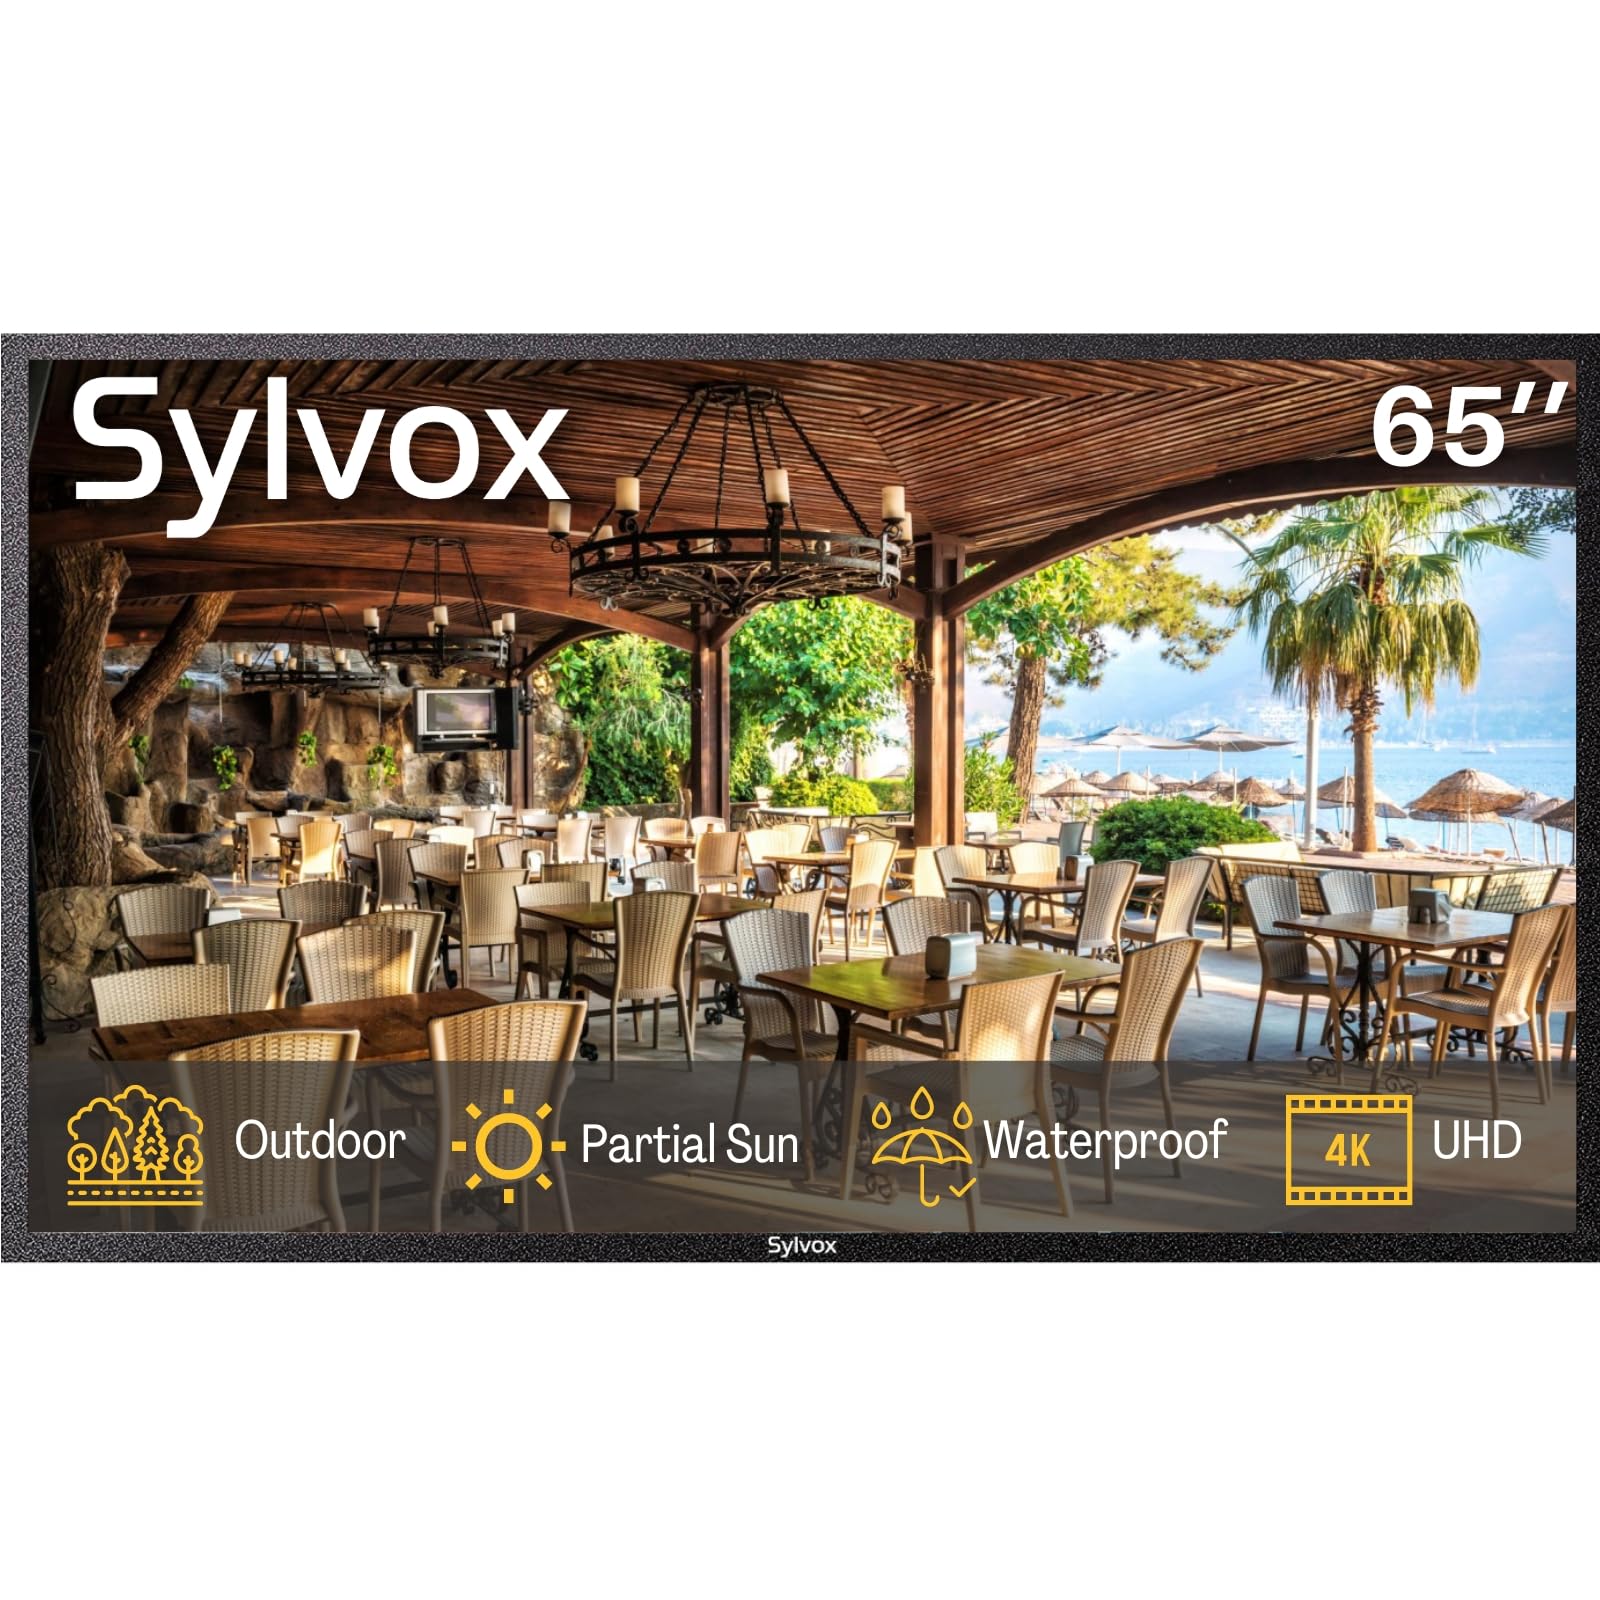 SYLVOX 65 inch Outdoor Signage TV, 1000nits for Partial Sun, IP66 Waterproof Outdoor TV, 4K UHD Commercial TV for Business, ATSC & NTSC Tuner, Support Bluetooth & 2.4G WiFi (Signage 1.0 Series)